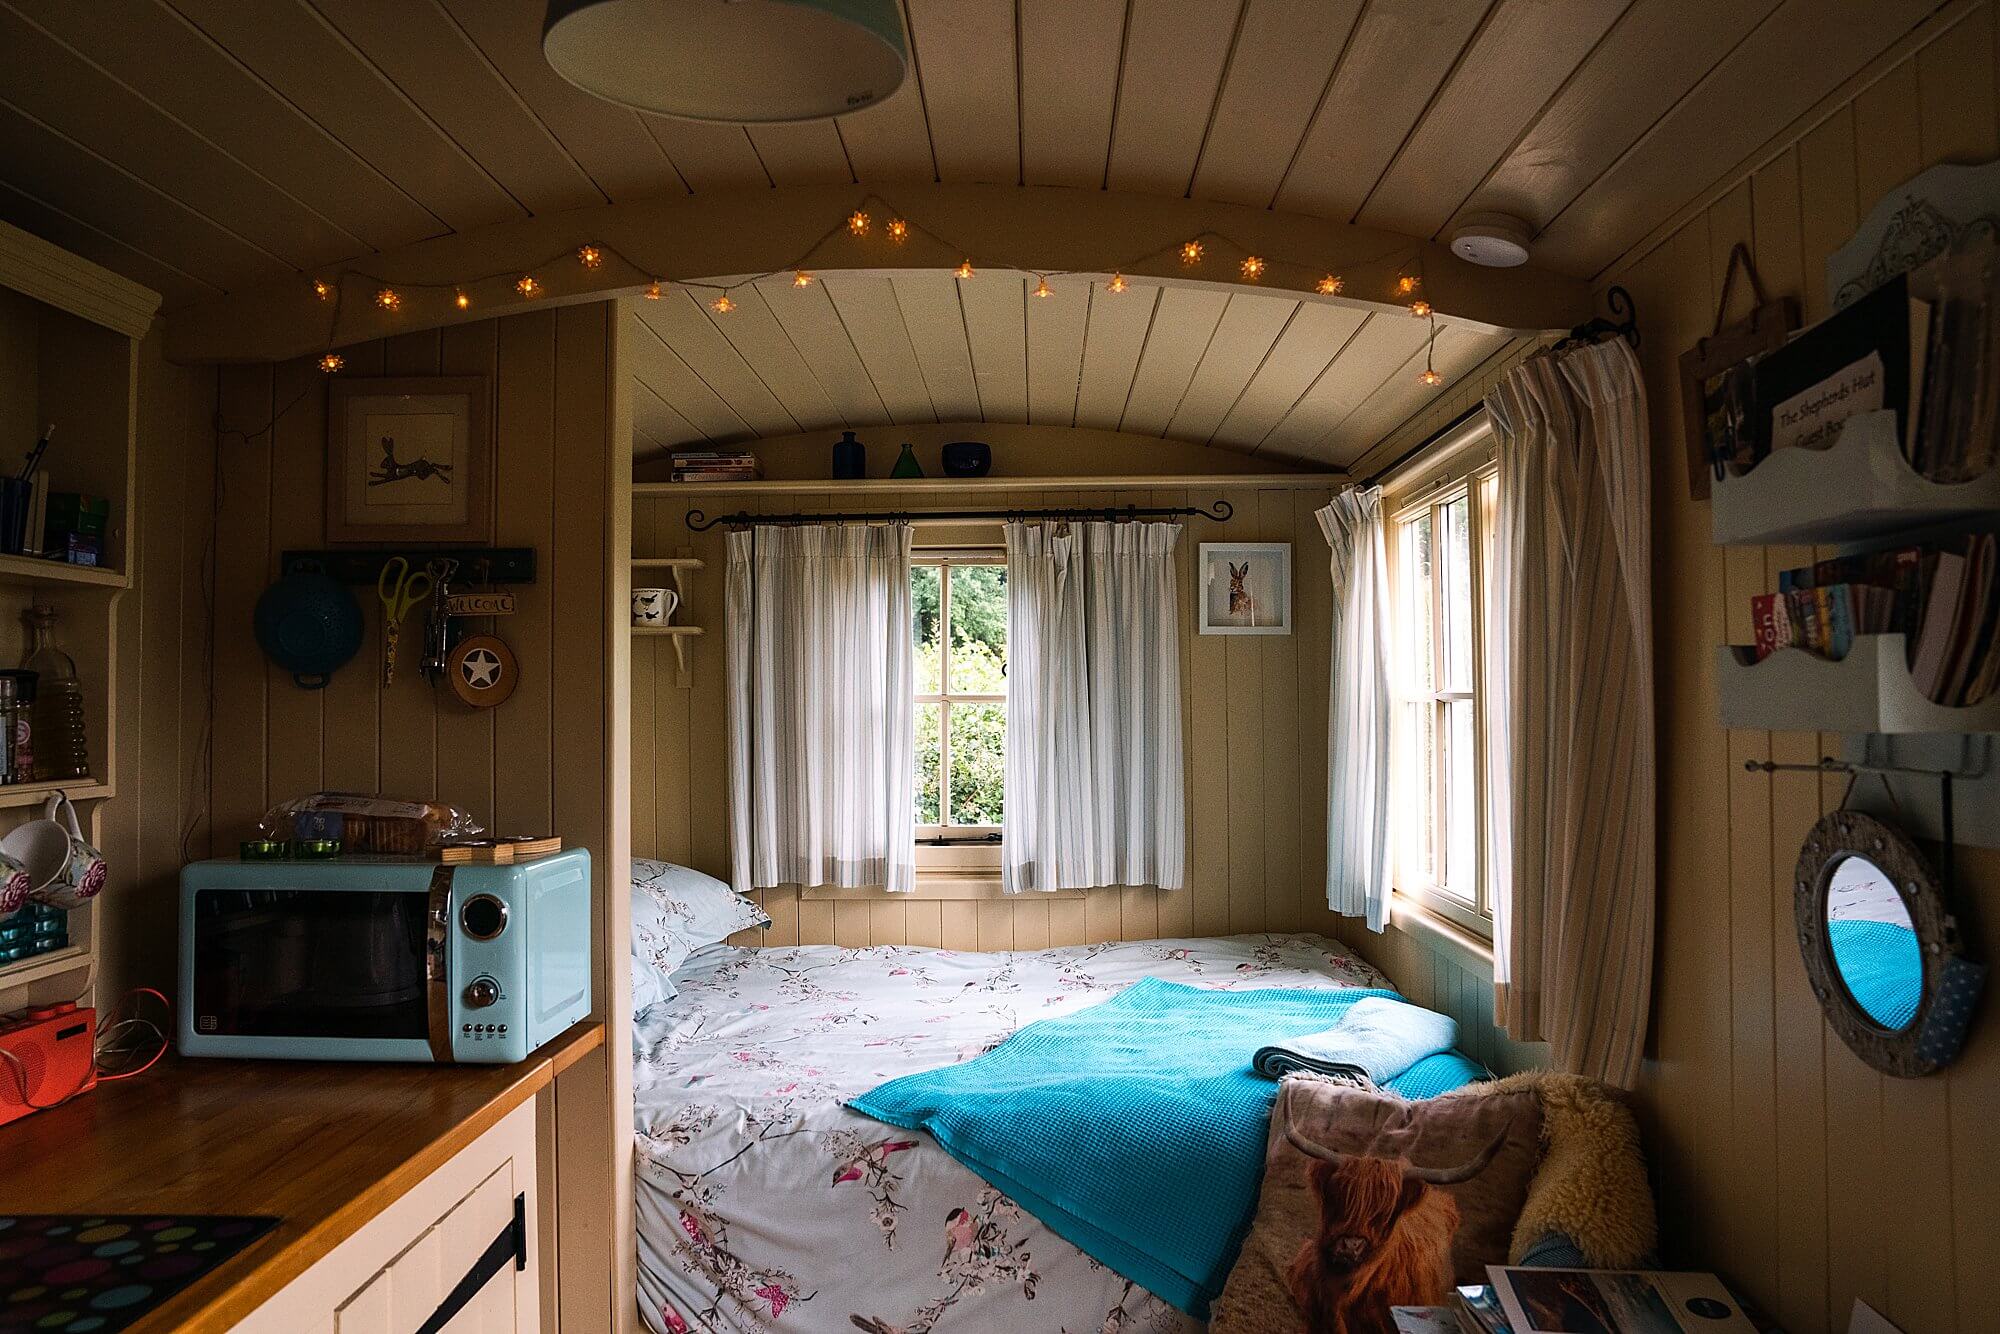 interior of the shepherds hut at trill farm orchard near axminster